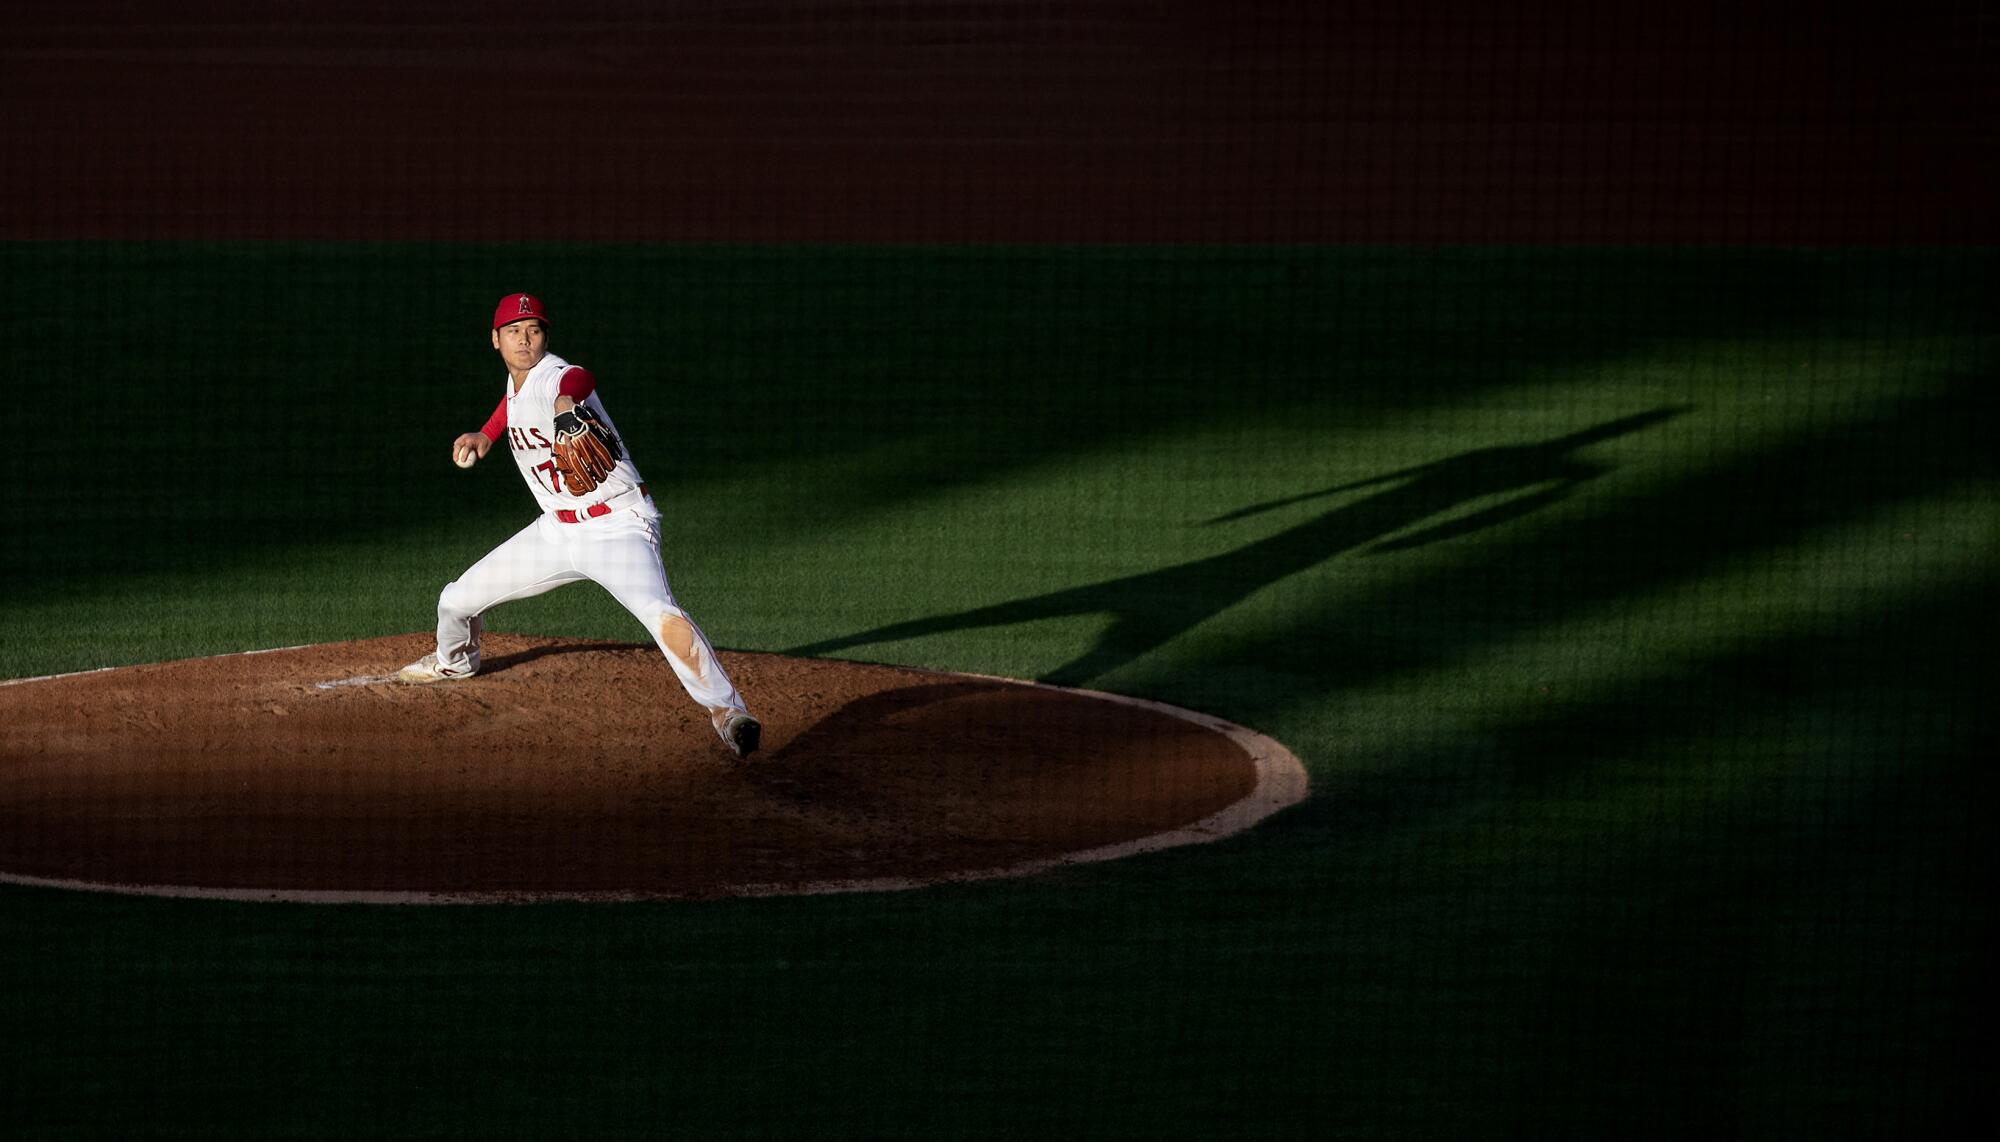 Angels starting pitcher Shohei Ohtani delivers a pitch in the third inning against the Dodgers at Angel Stadium on June 21.